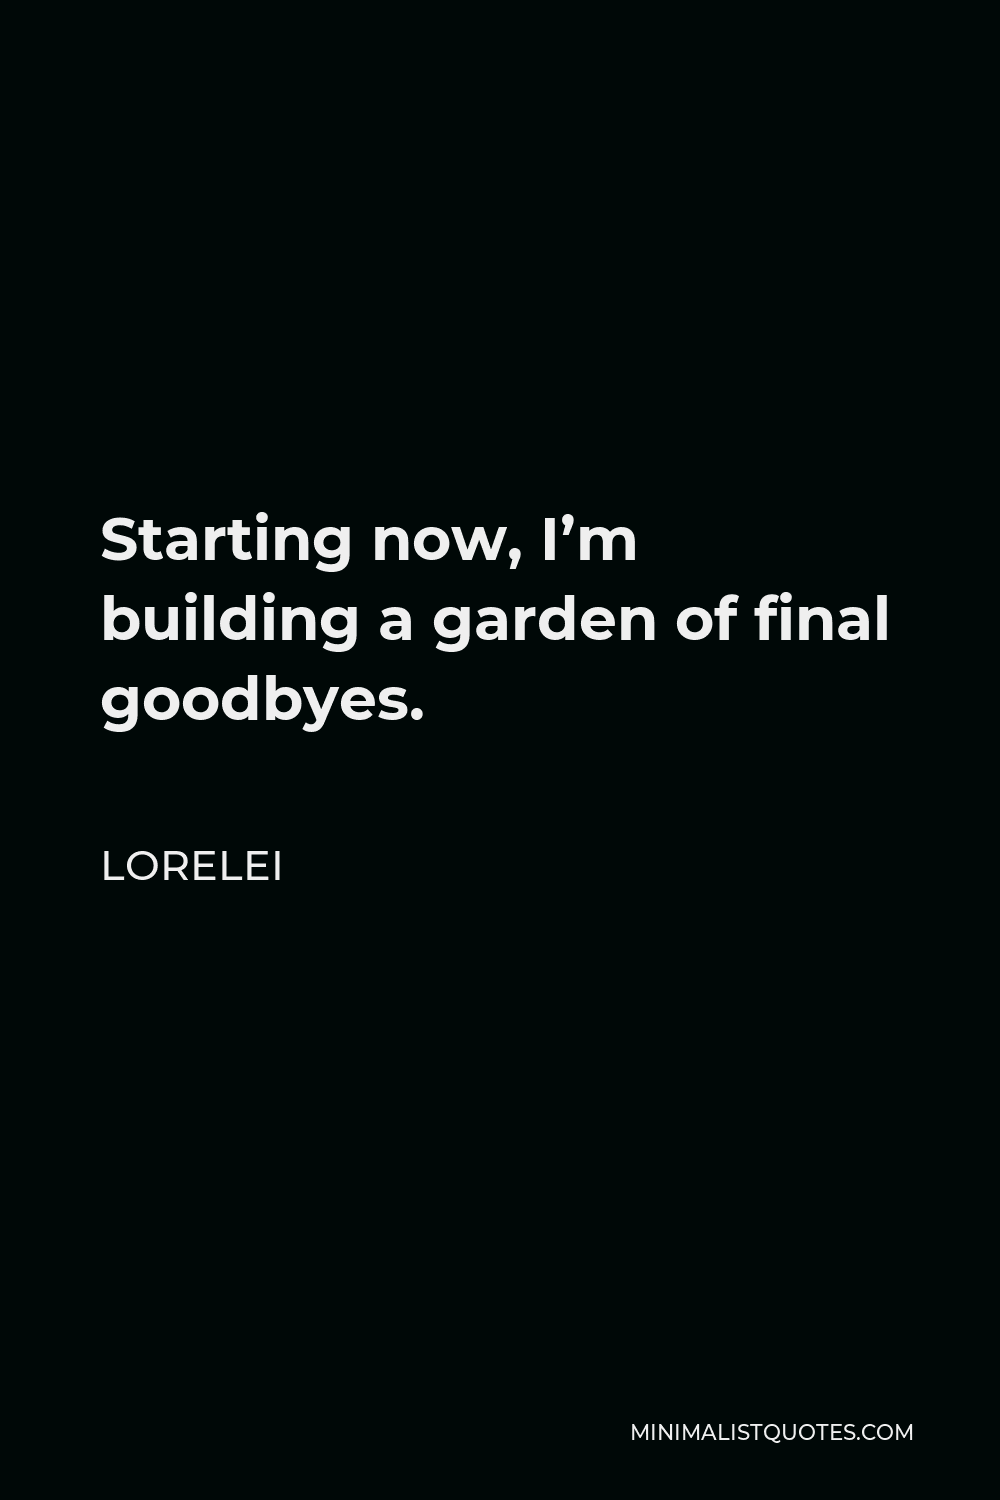 Lorelei Quote - Starting now, I’m building a garden of final goodbyes.